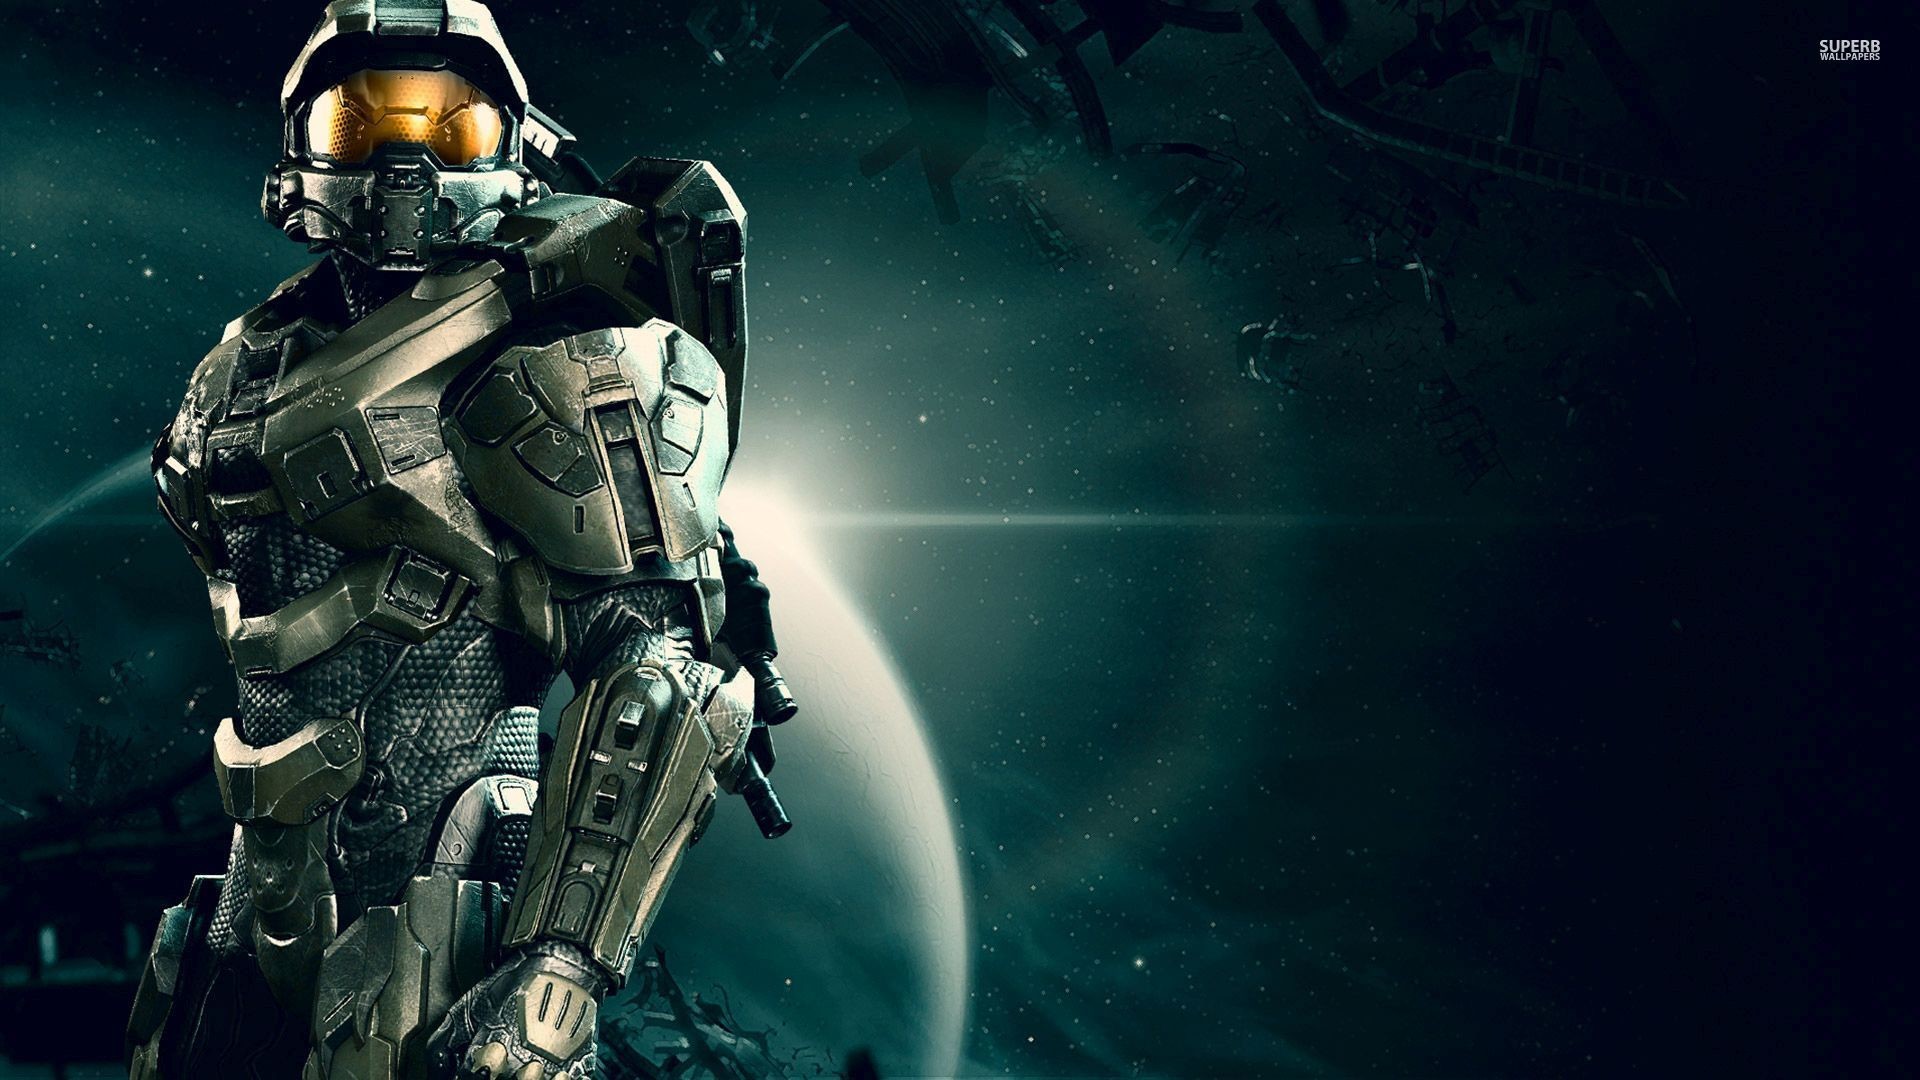 1920x1080 Search Results for “the master chief wallpaper” – Adorable Wallpapers